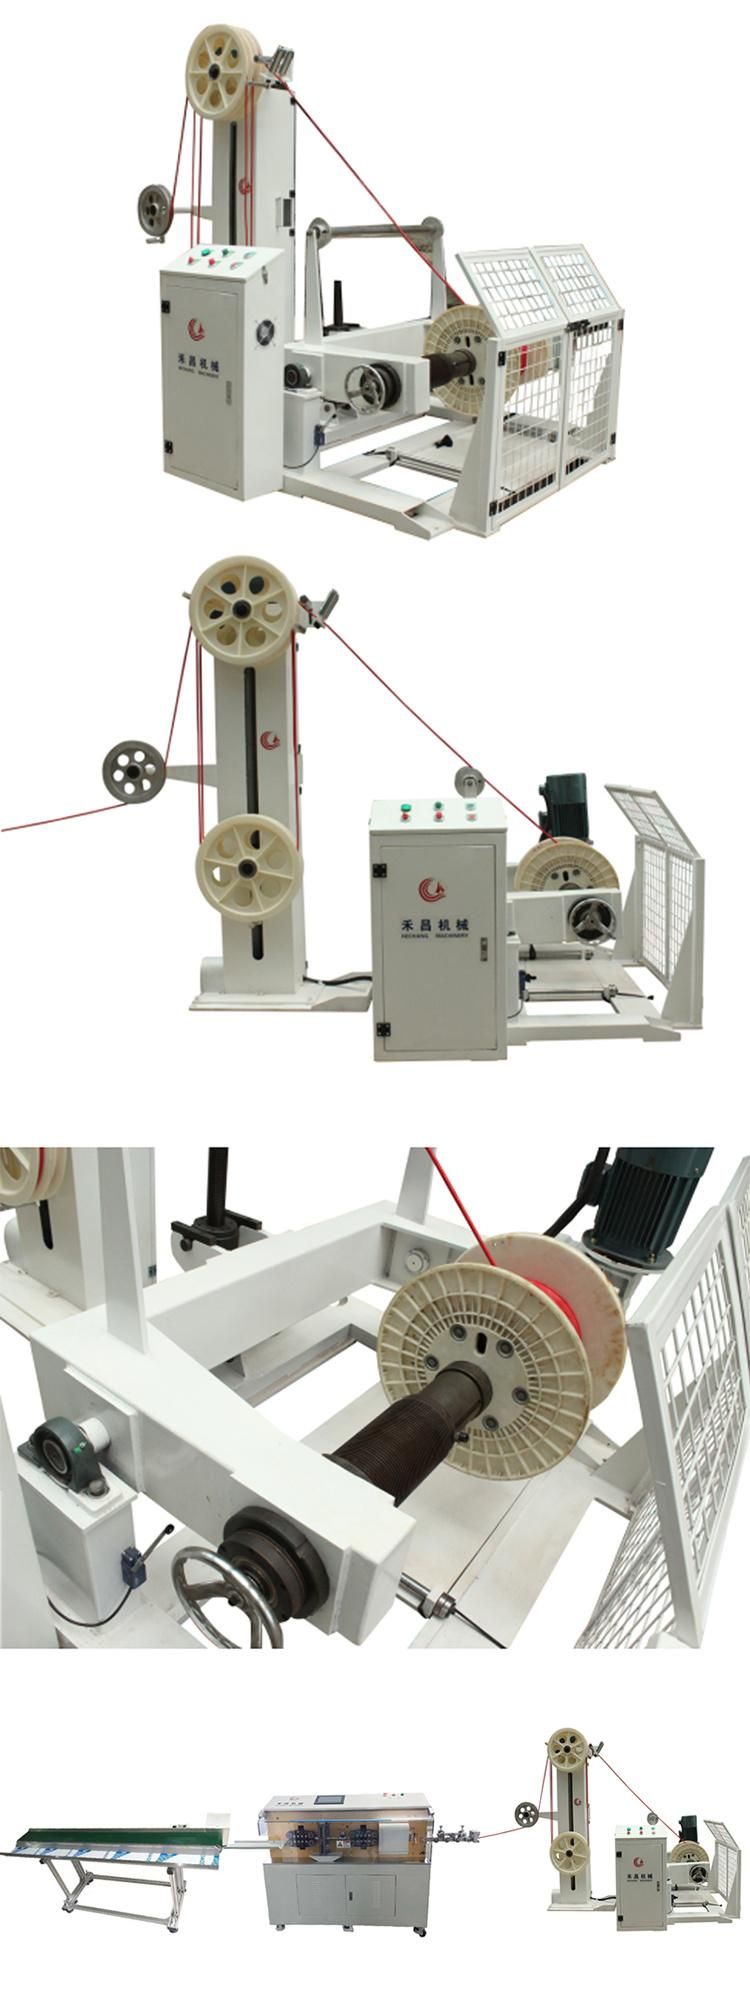 Hc-800 Automatic Cable Wire Feeding Machine